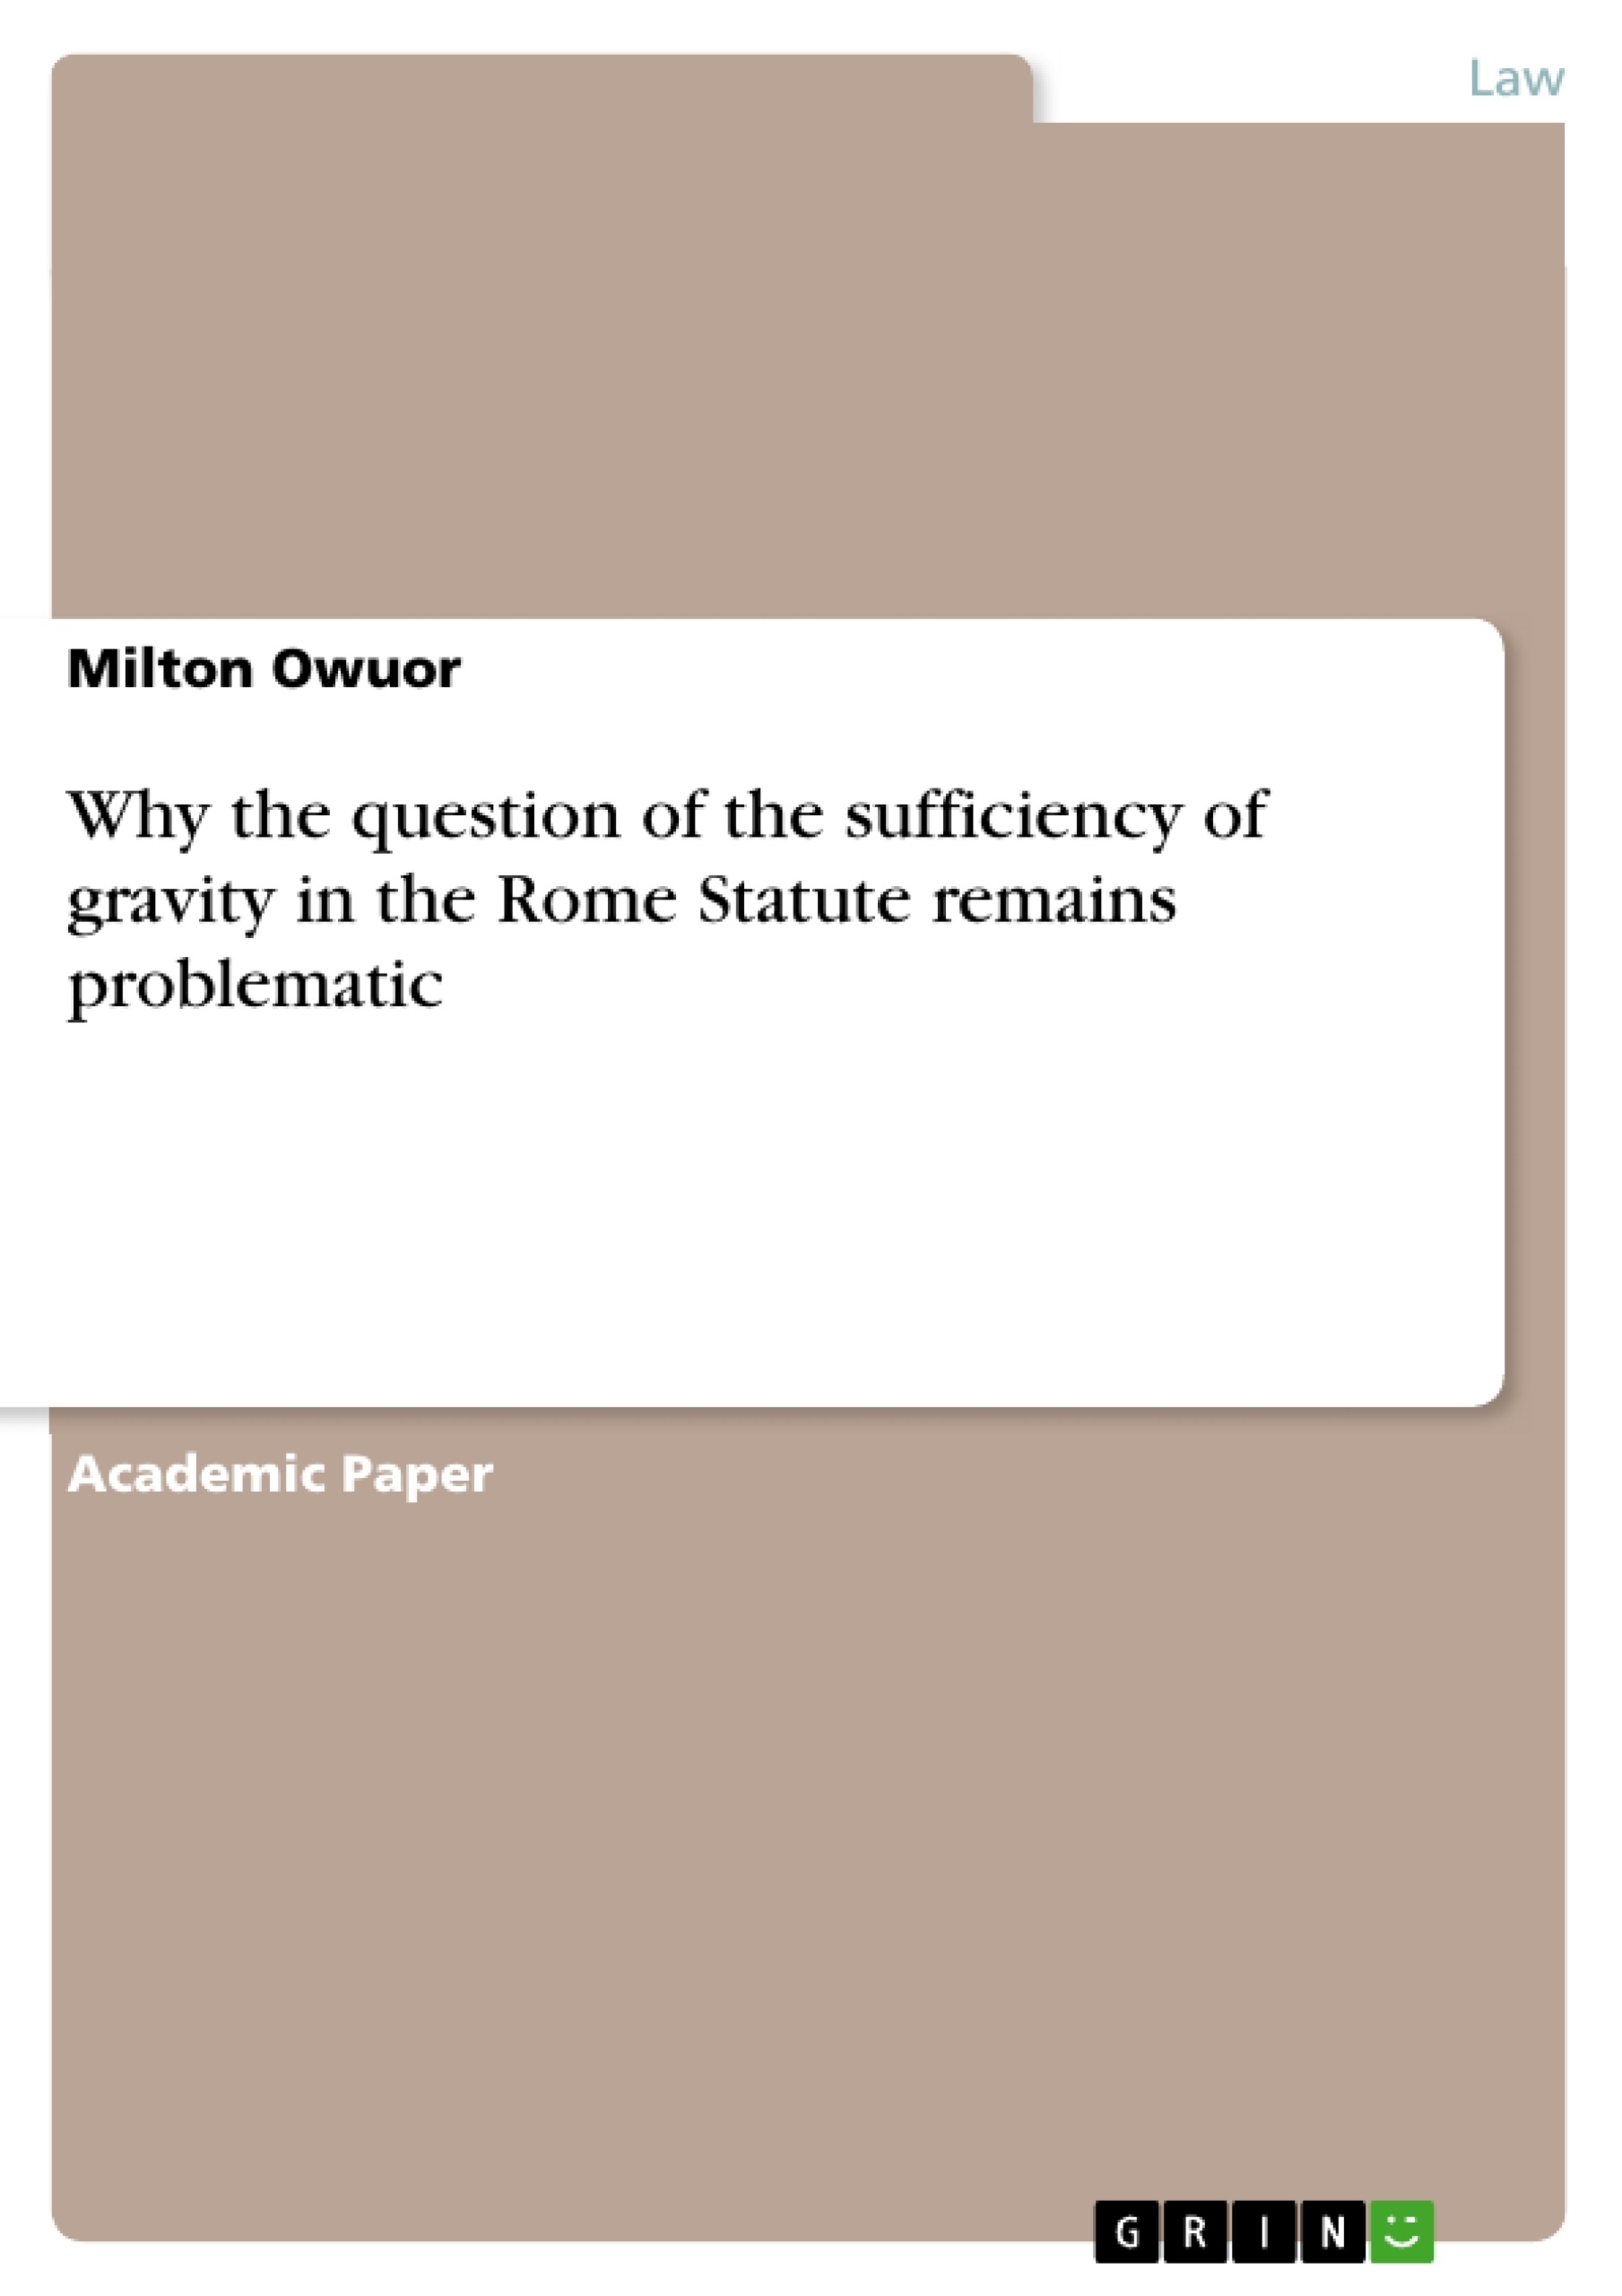 Titel: Why the question of the sufficiency of gravity in the Rome Statute remains problematic